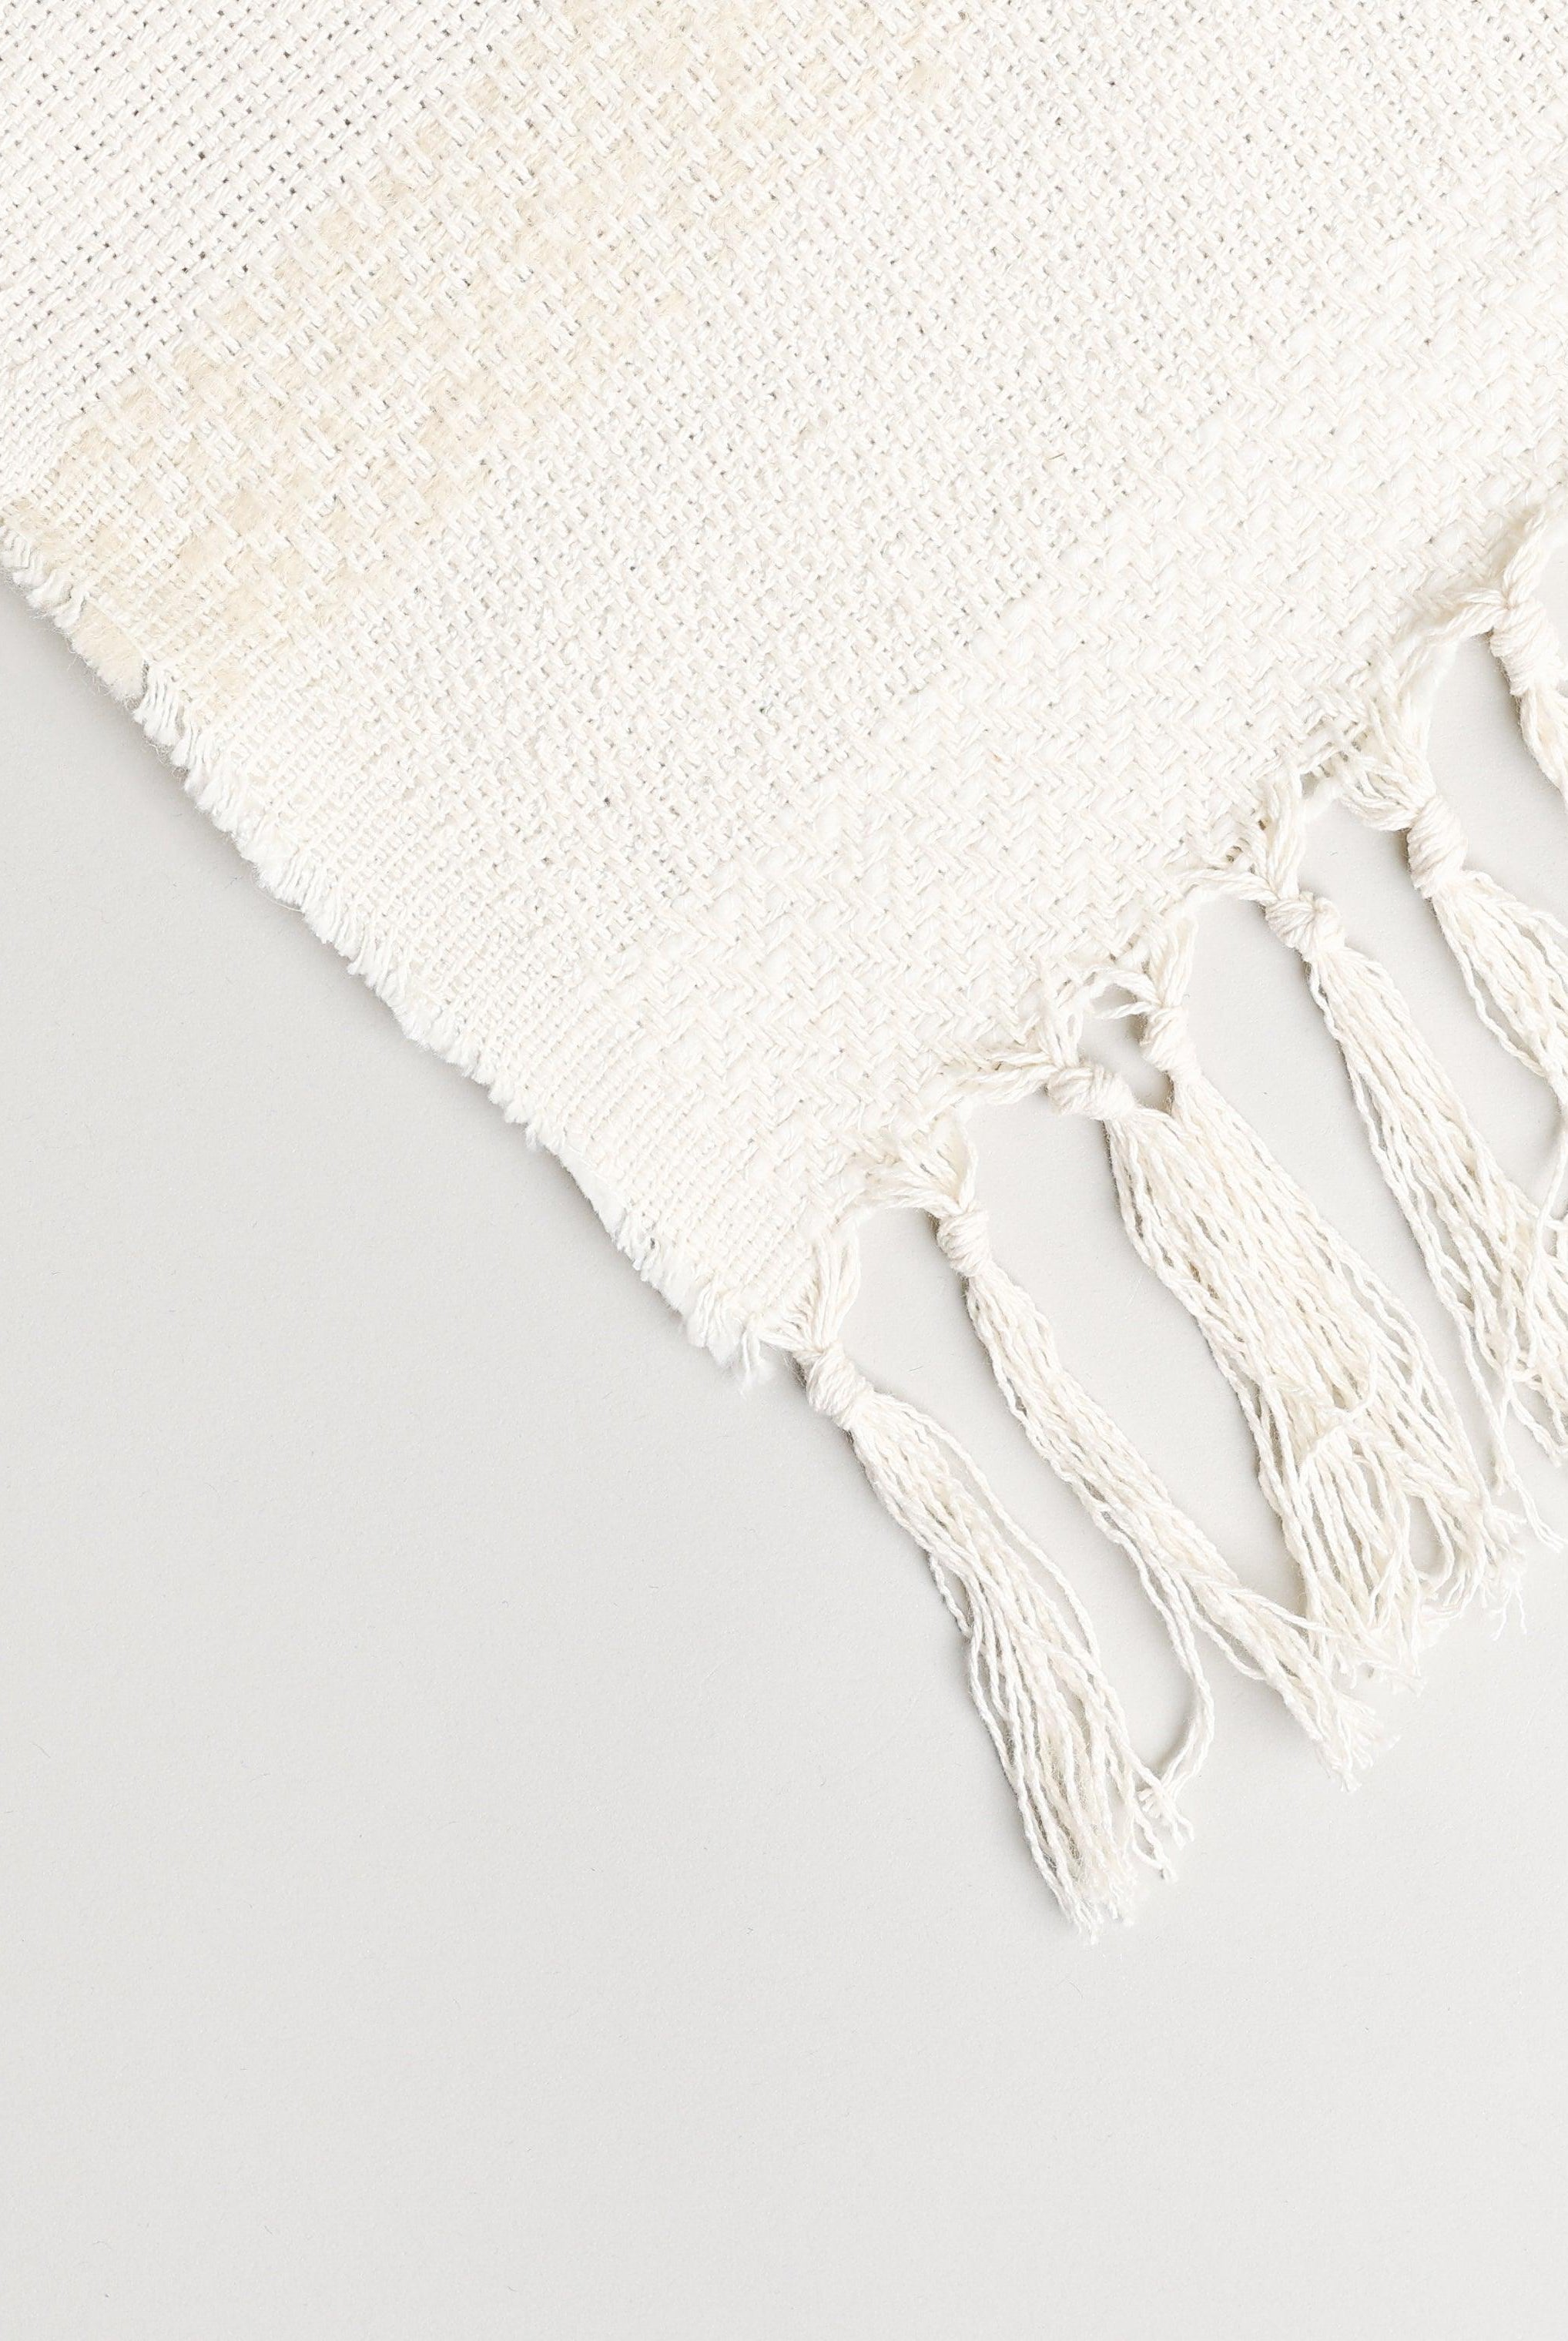 TEXTURED BOUCLE SOLID THROW - Boucle Home